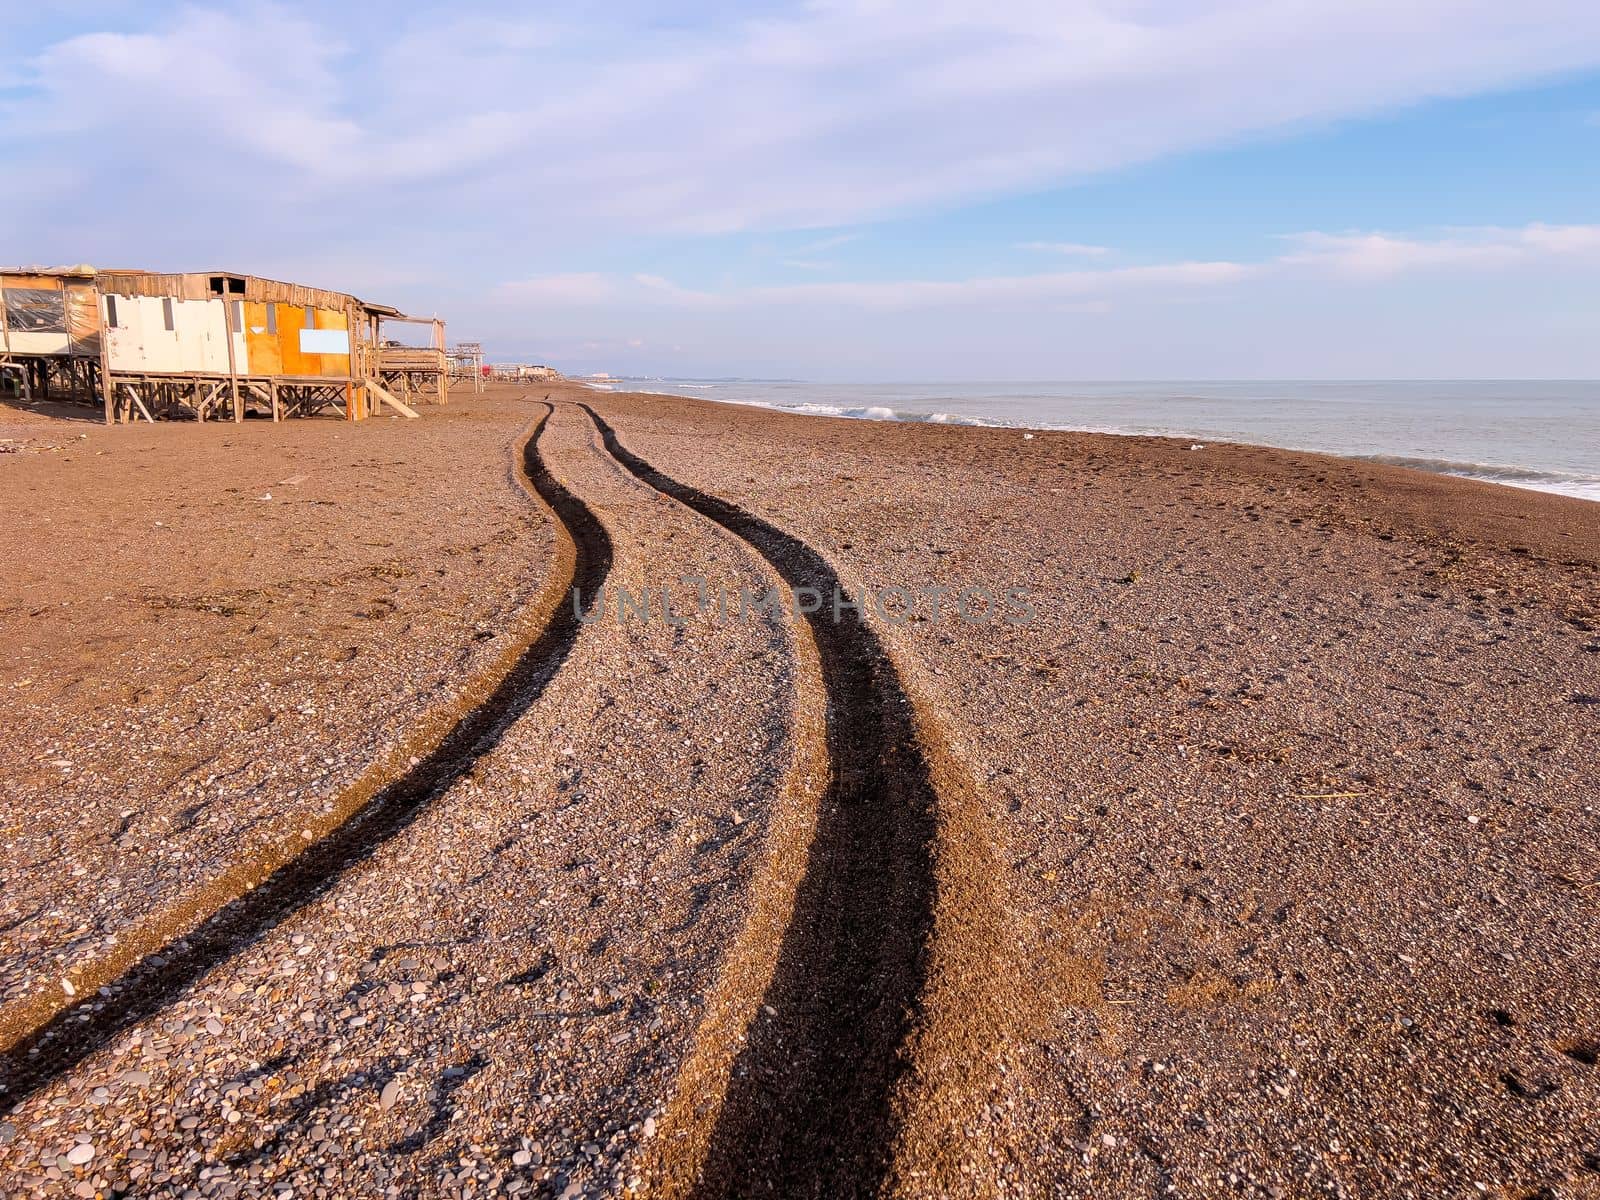 Wheel track of a 4x4 vehicle driving past the beach at sunset by Sonat